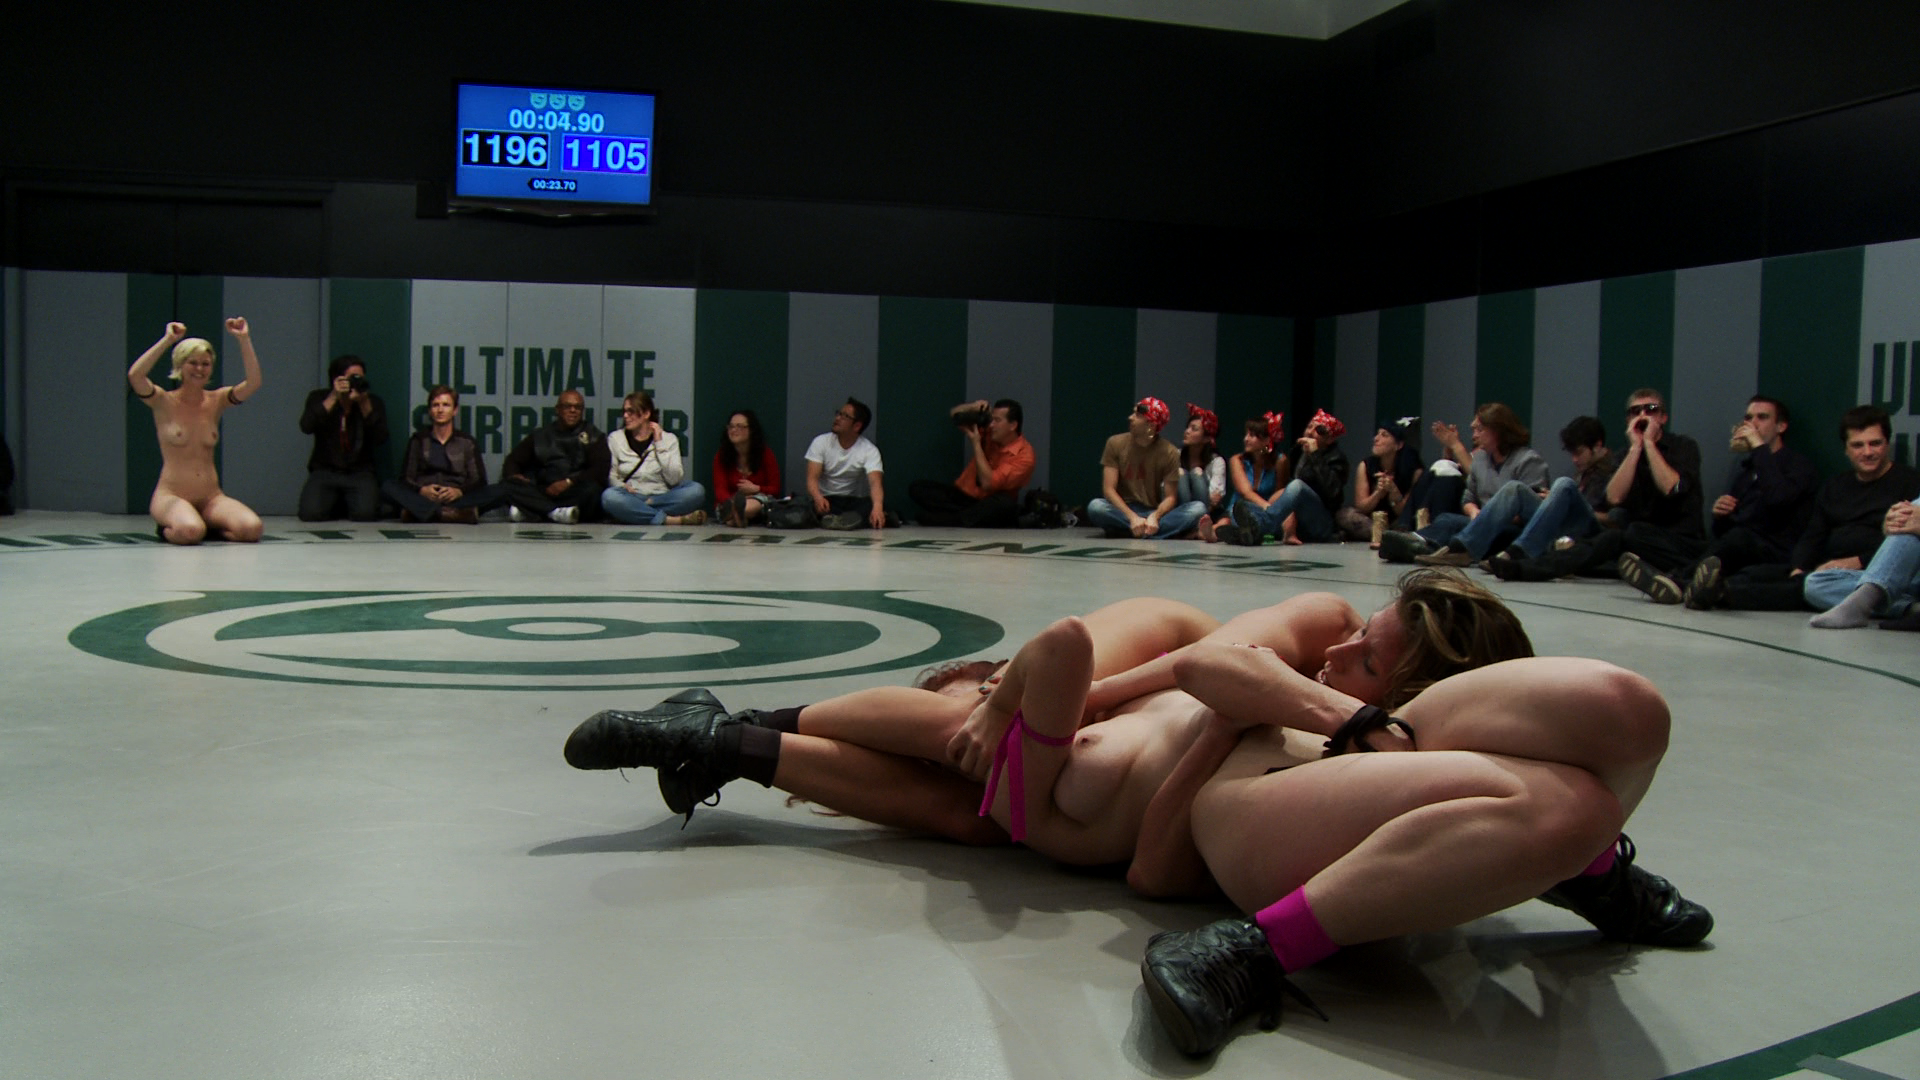 Brutal 4 girl Tag Team Match up! Non-scripted, sexual submission wrestling Crushing scissor holds